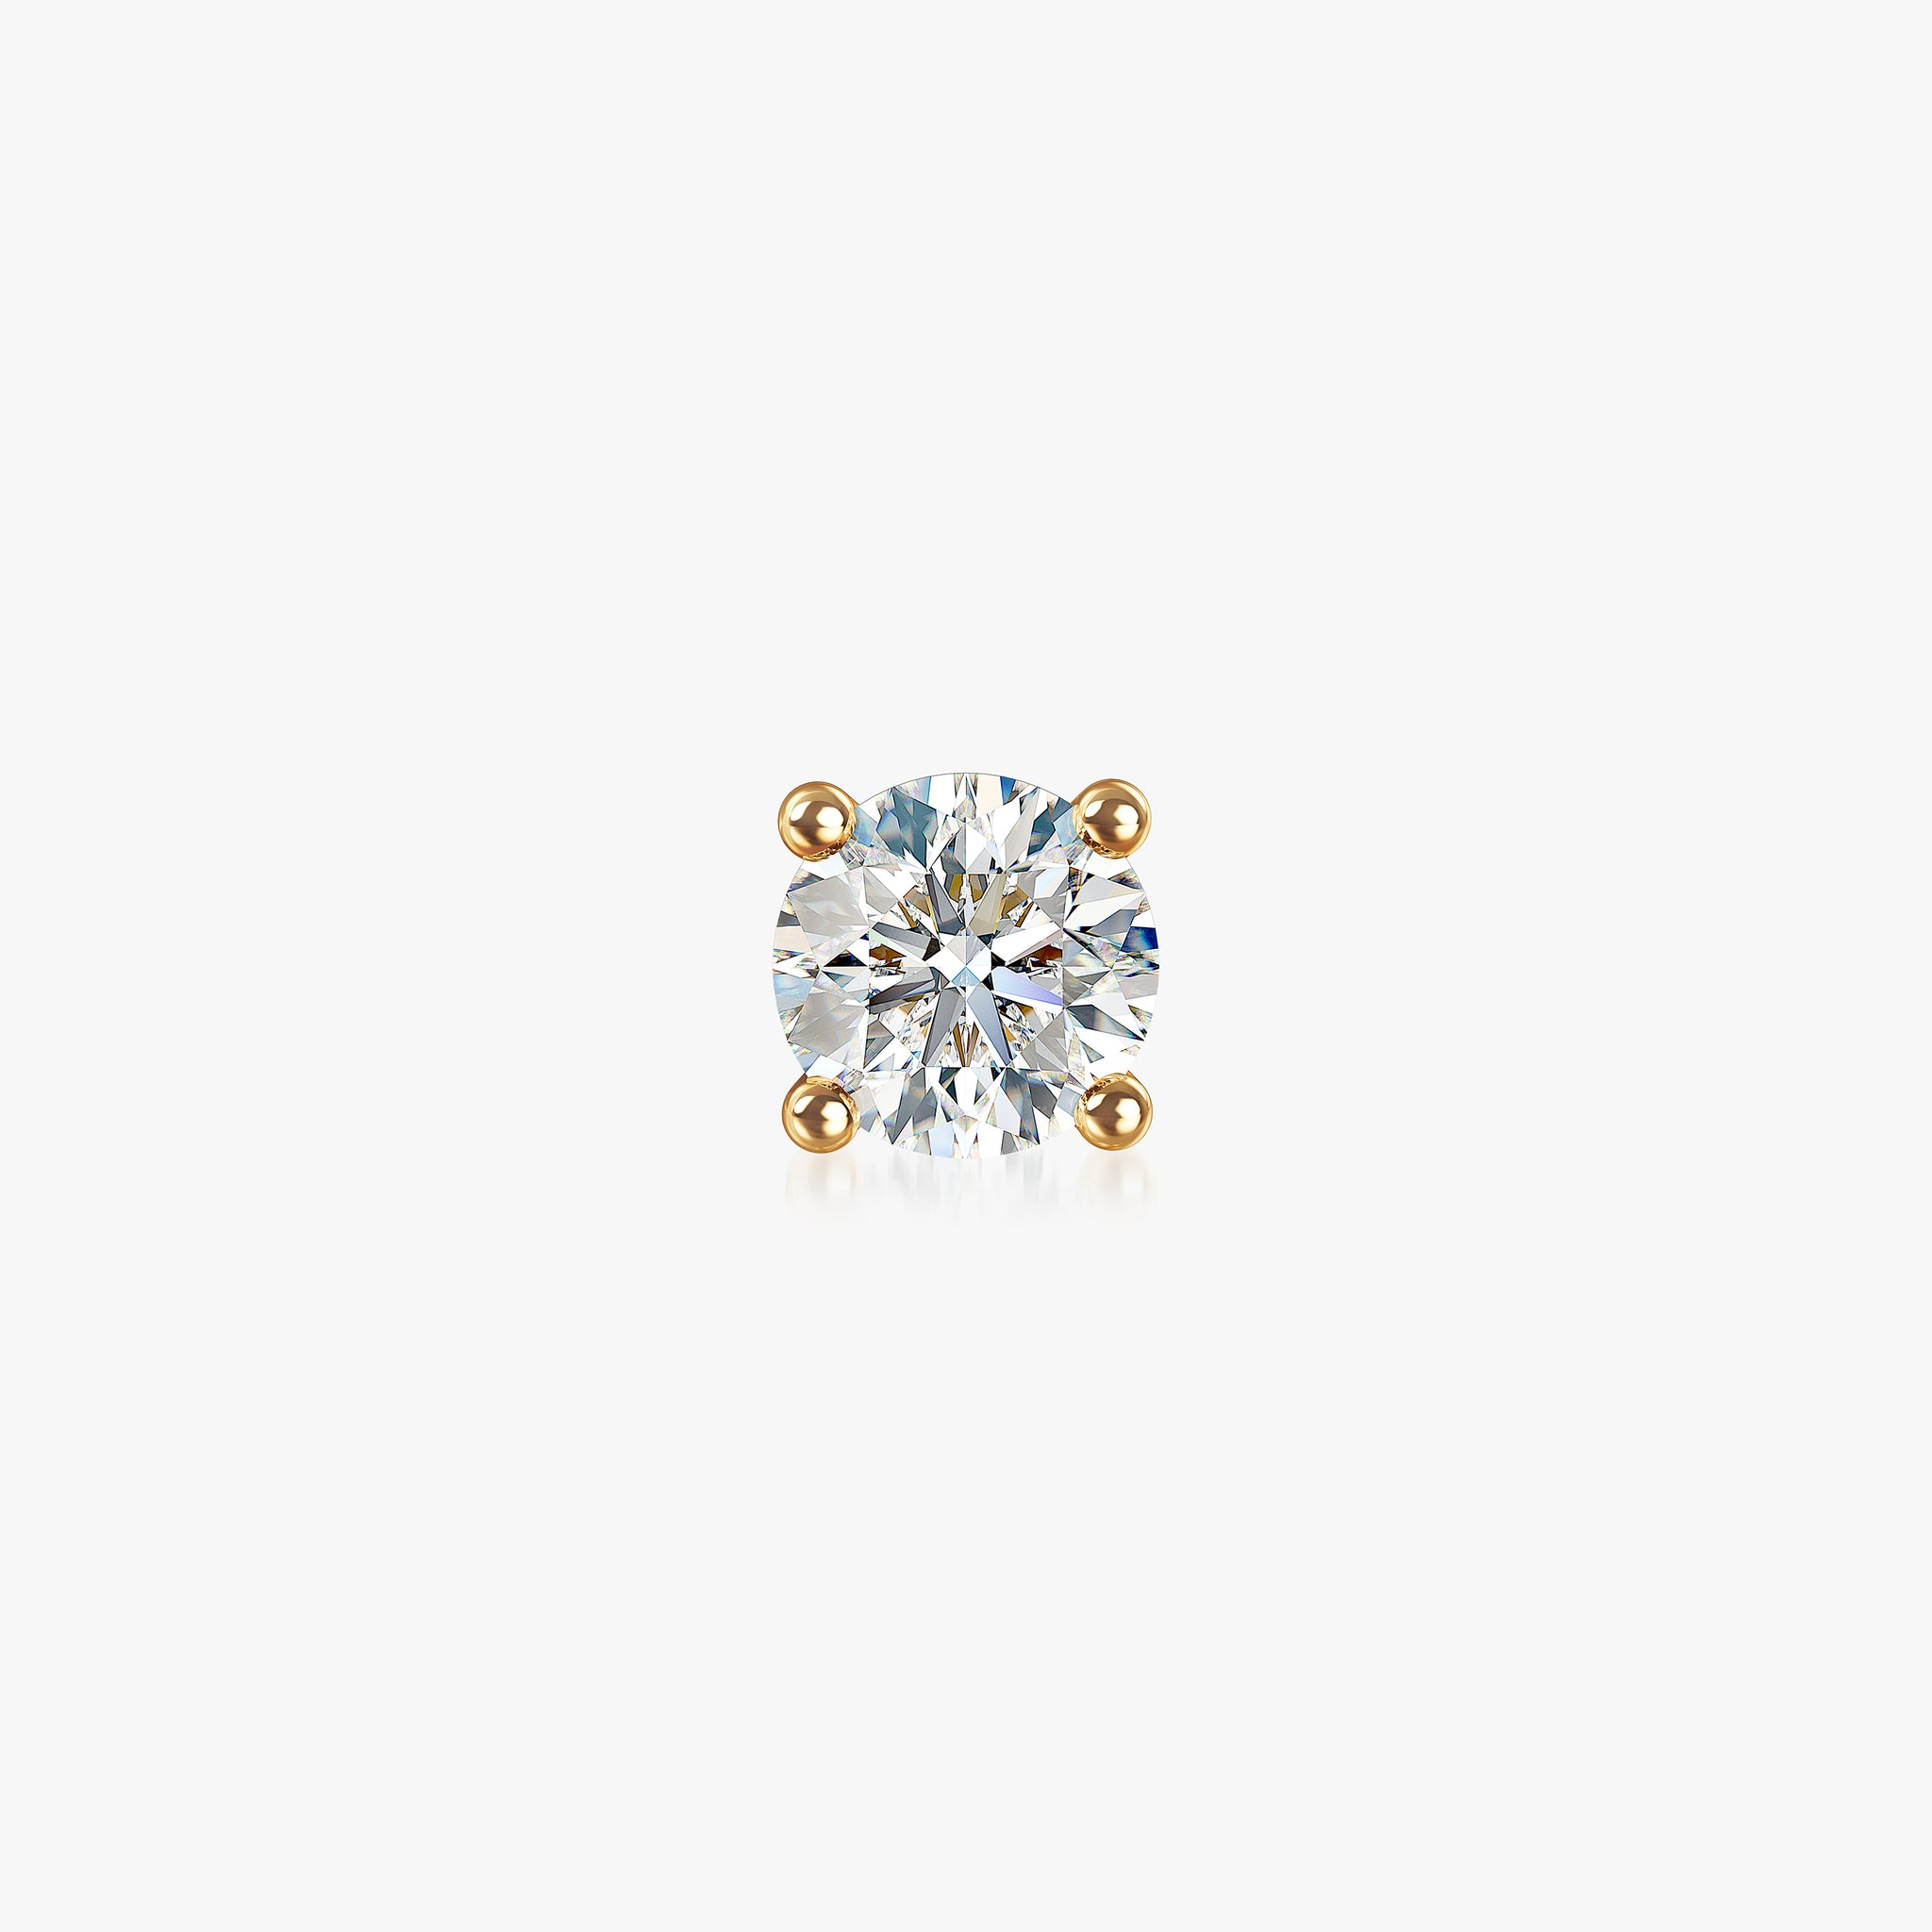 J'EVAR 18KT Yellow Gold ALTR Lab Grown Diamond Single Stud Earring with Guardian Backs Front View